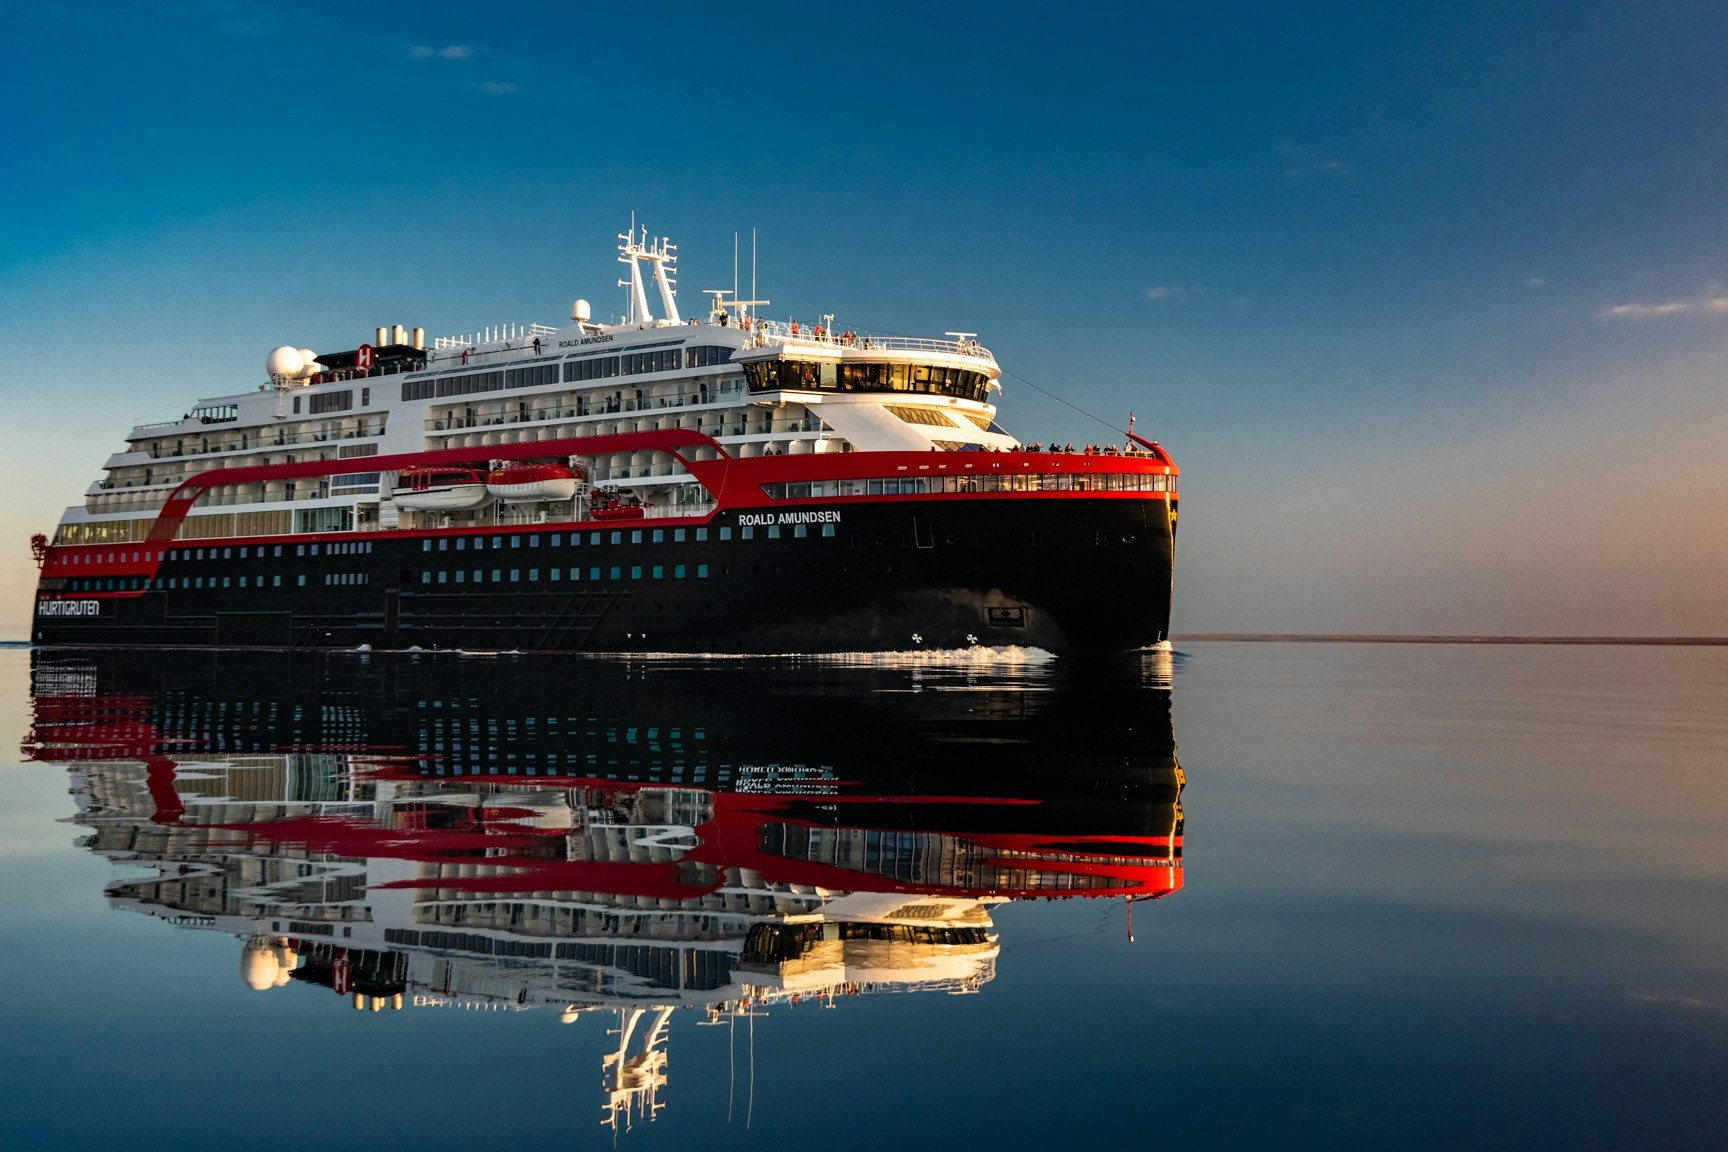 The Roald Amundsen ship on water with its image reflected in the water